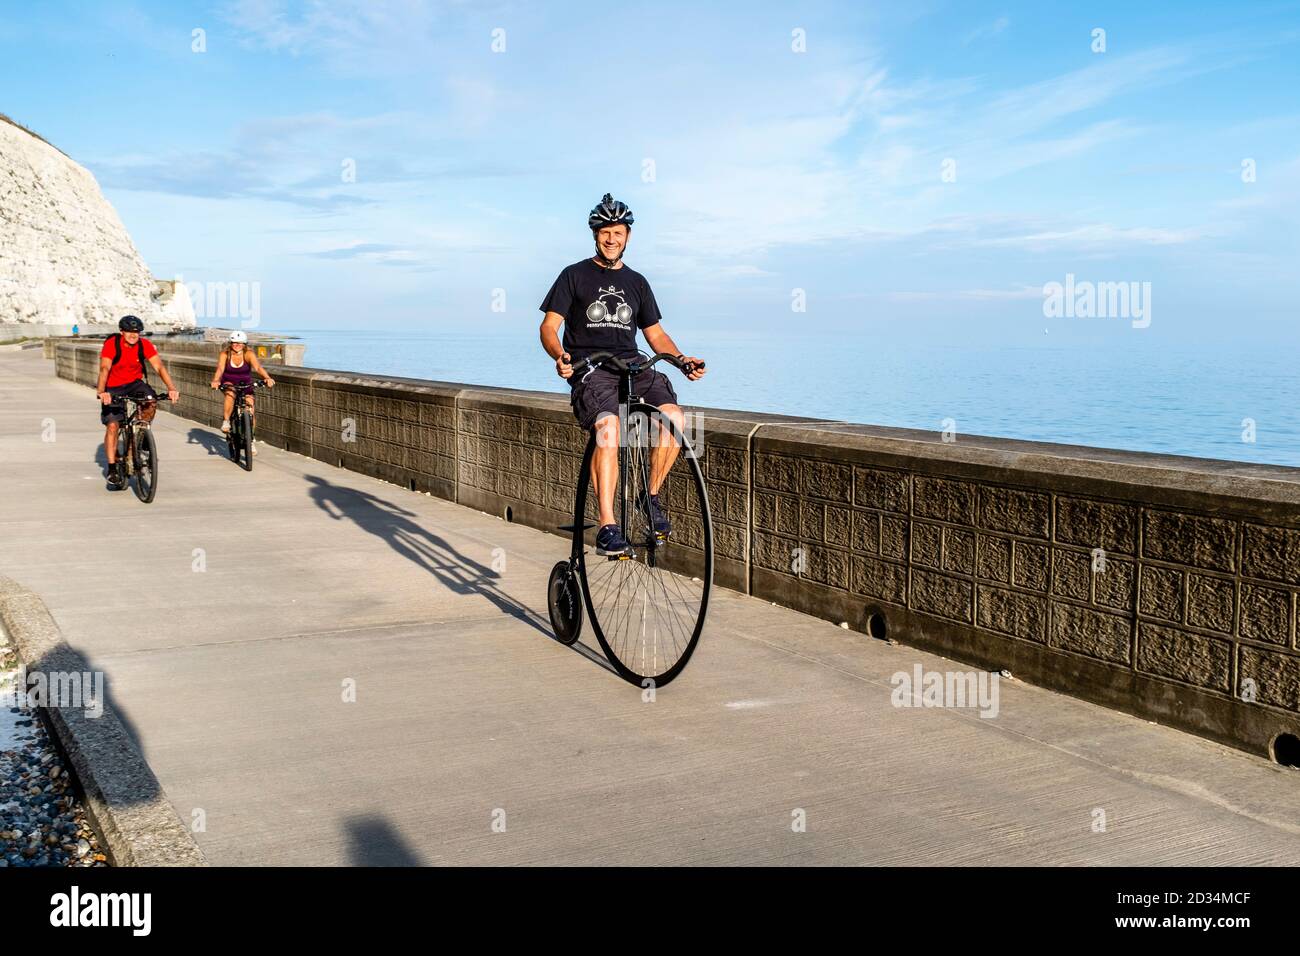 A Man Riding A Penny Farthing Bicycle lungo la passeggiata Undercliff, Rottindean, East Sussex, UK. Foto Stock